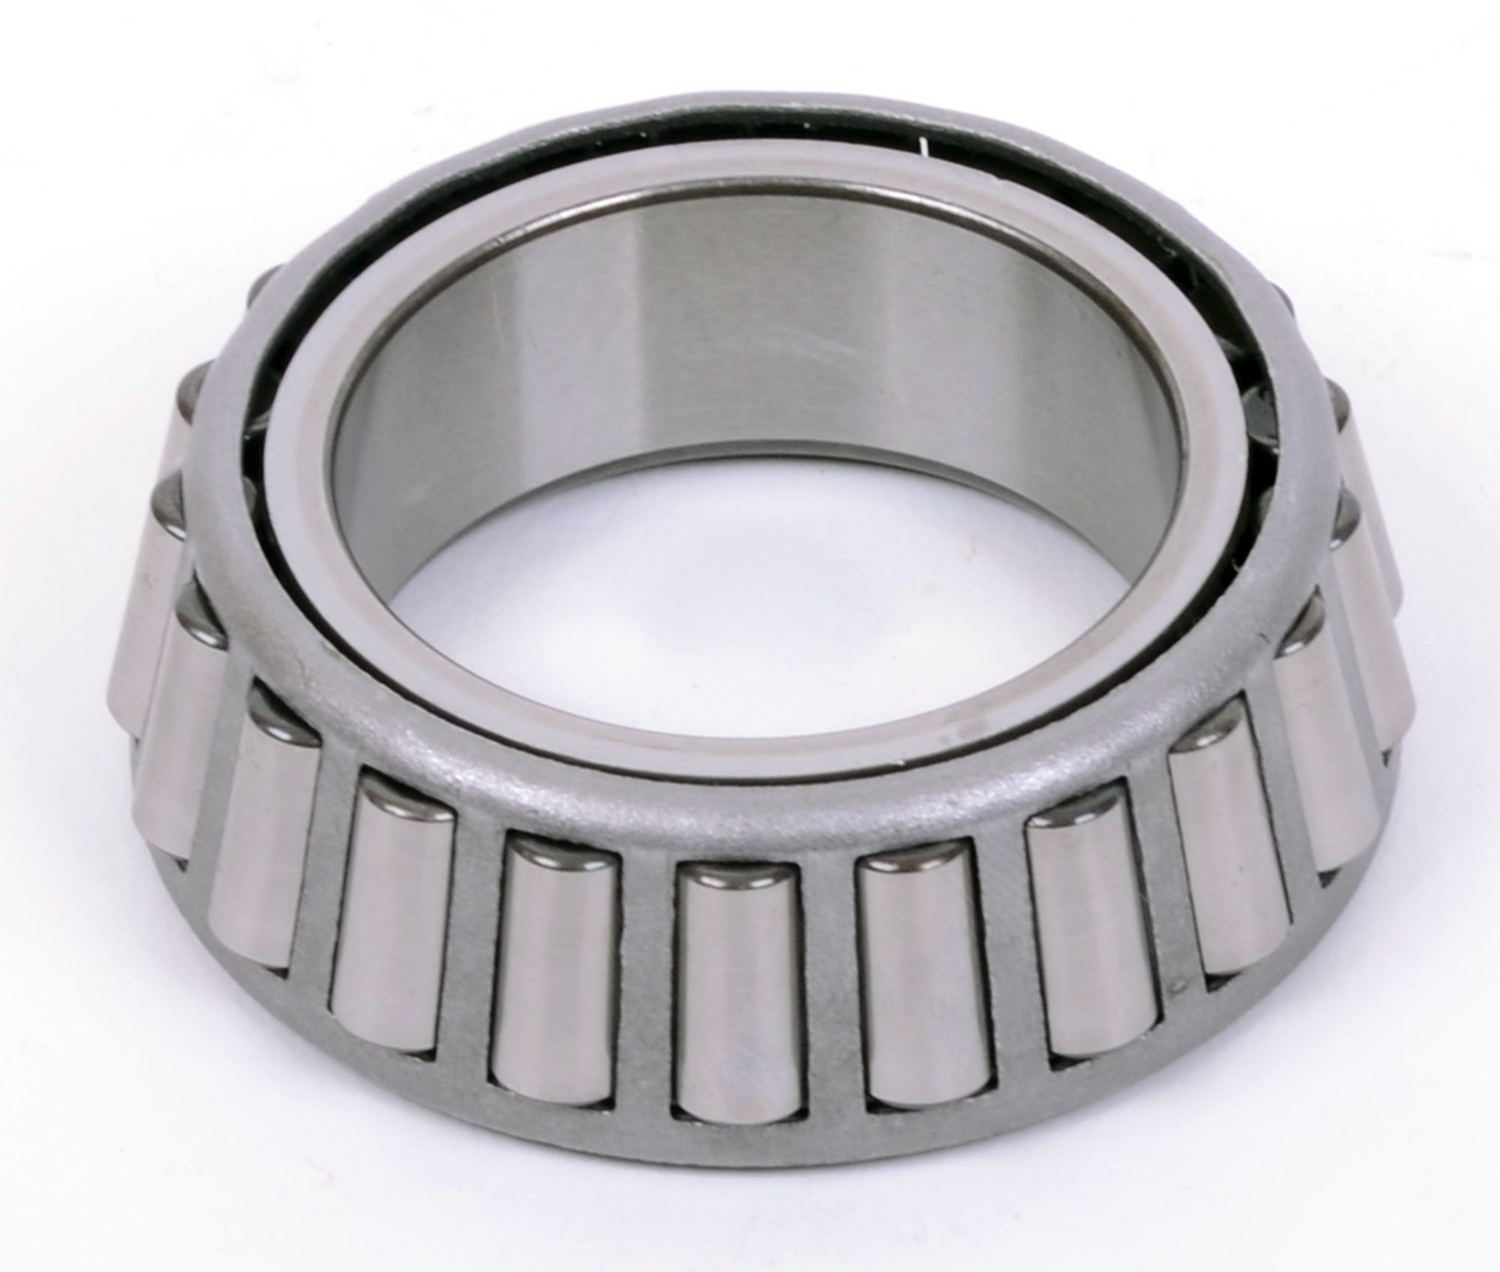 SKF (CHICAGO RAWHIDE) - Manual Transmission Differential Bearing - SKF LM29749 VP